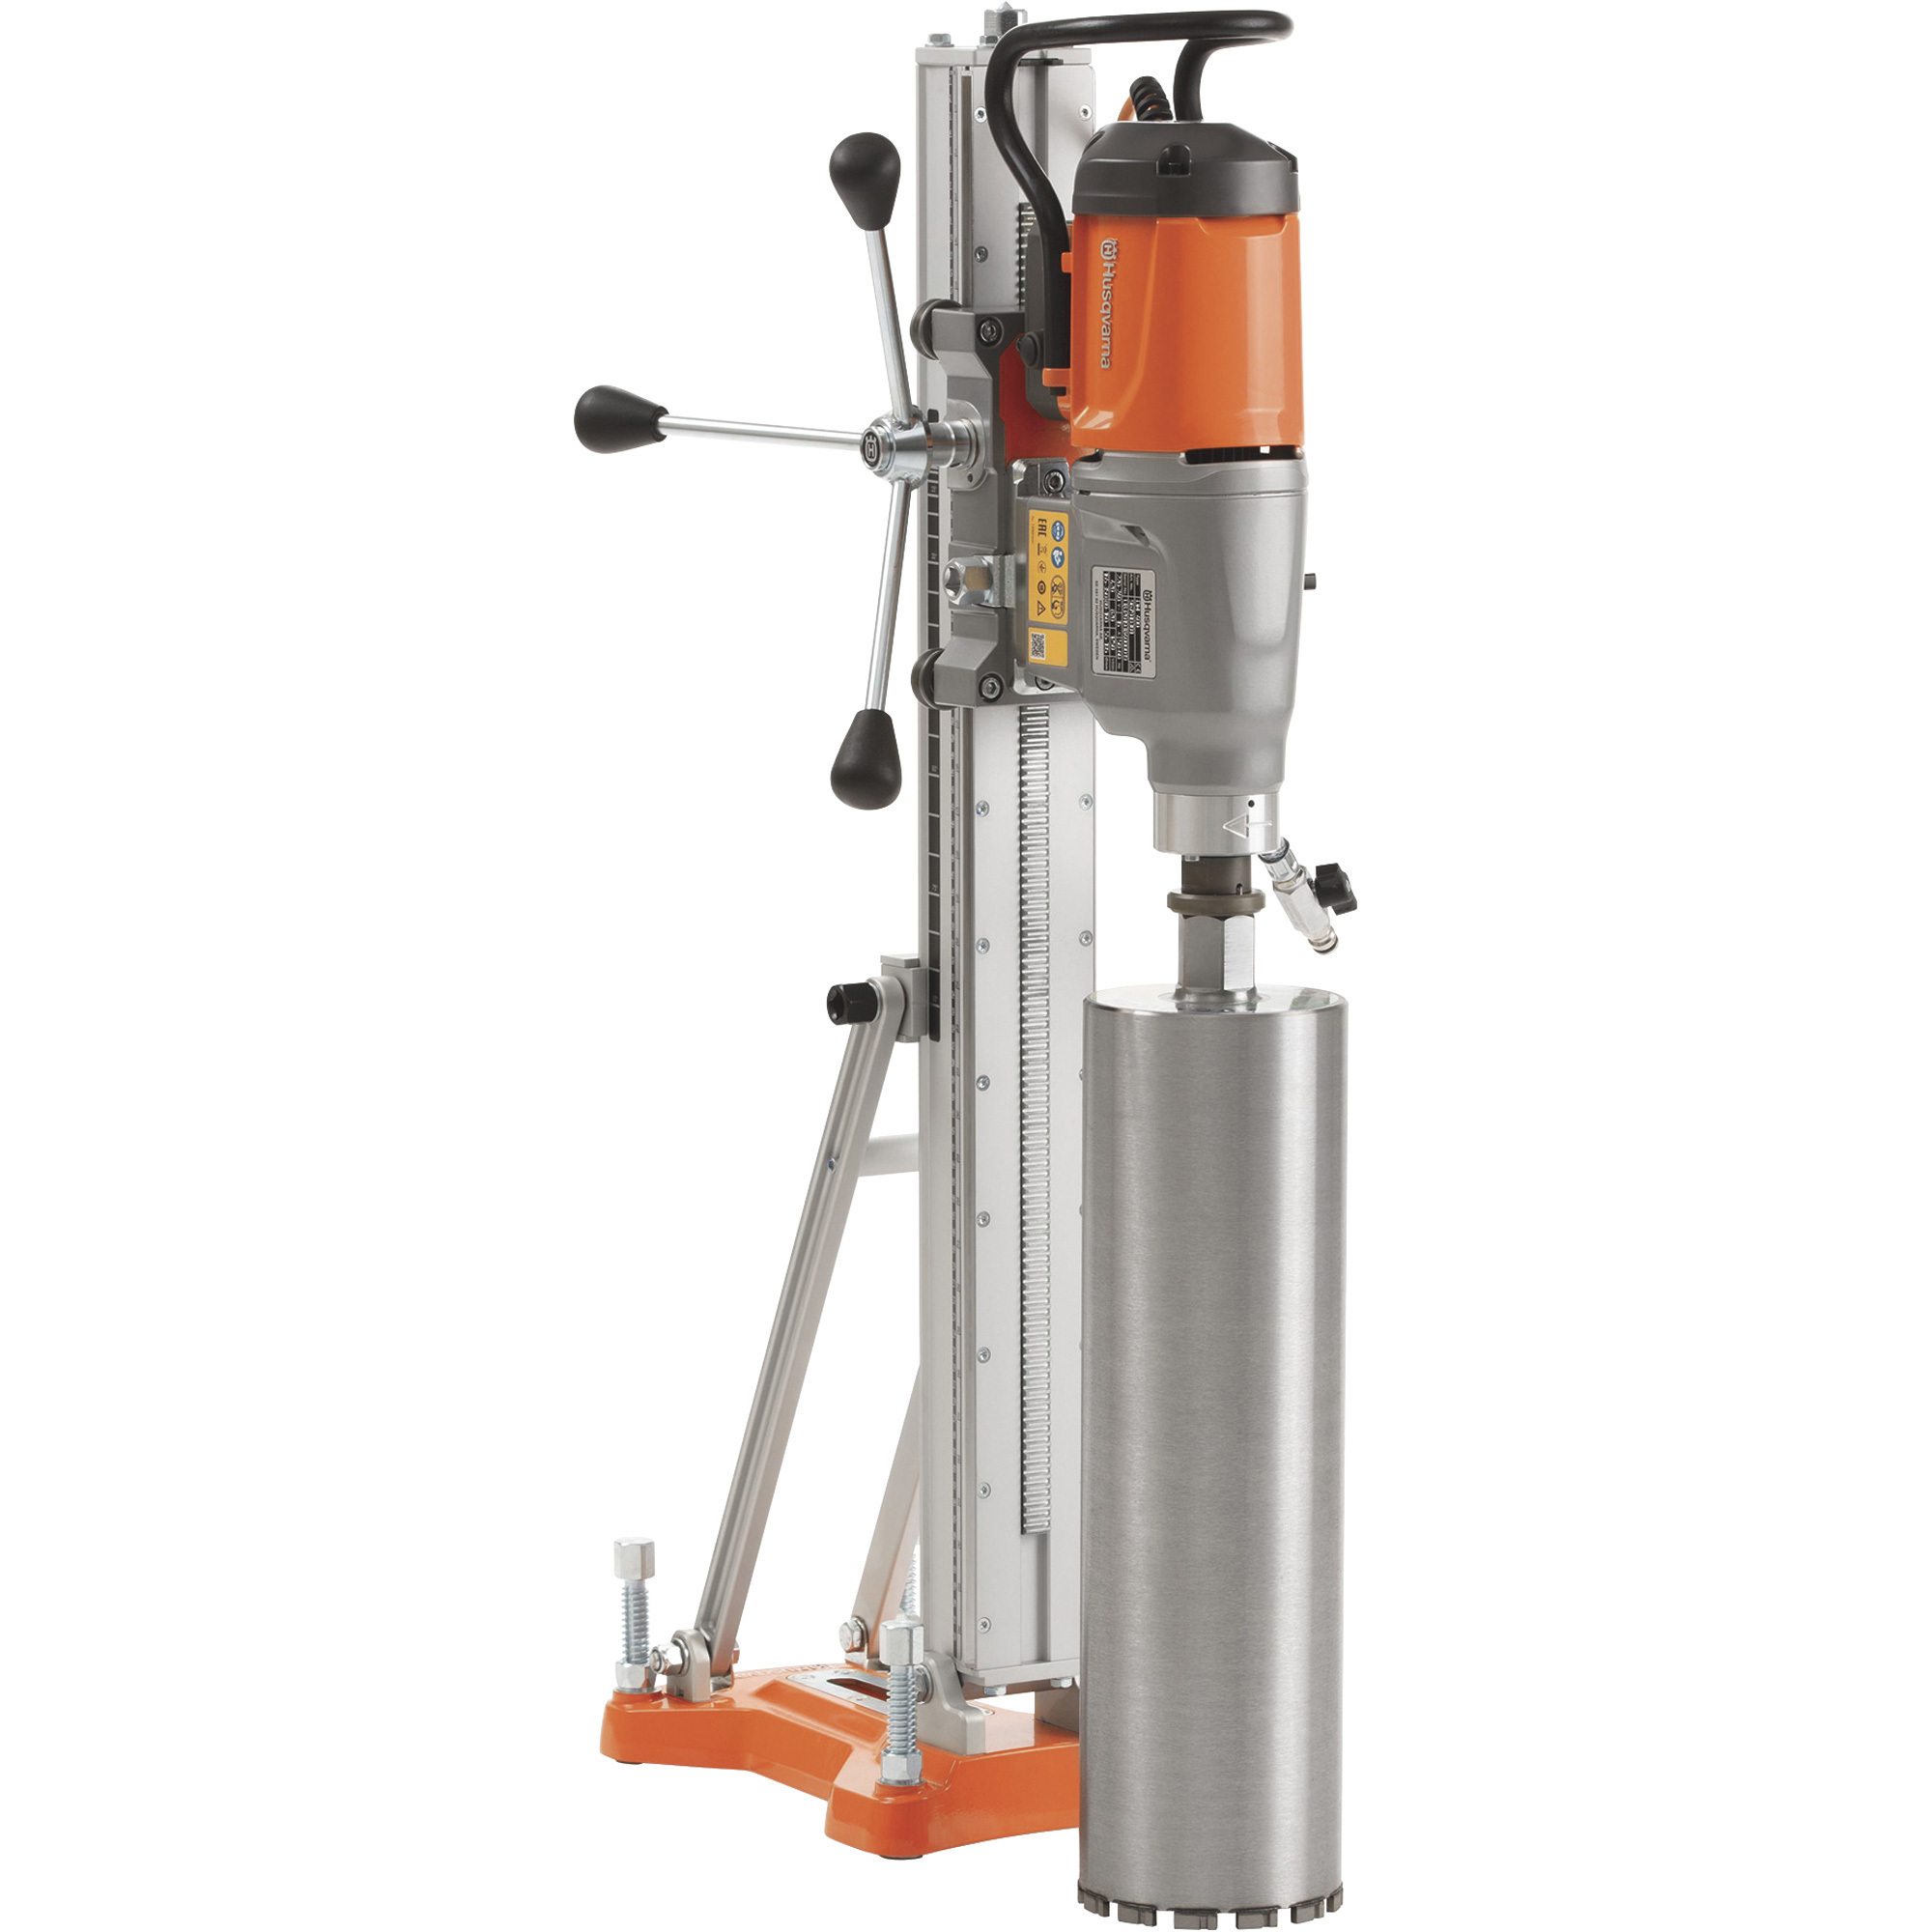 Husqvarna Core Drill and Stand, Model DMS 400